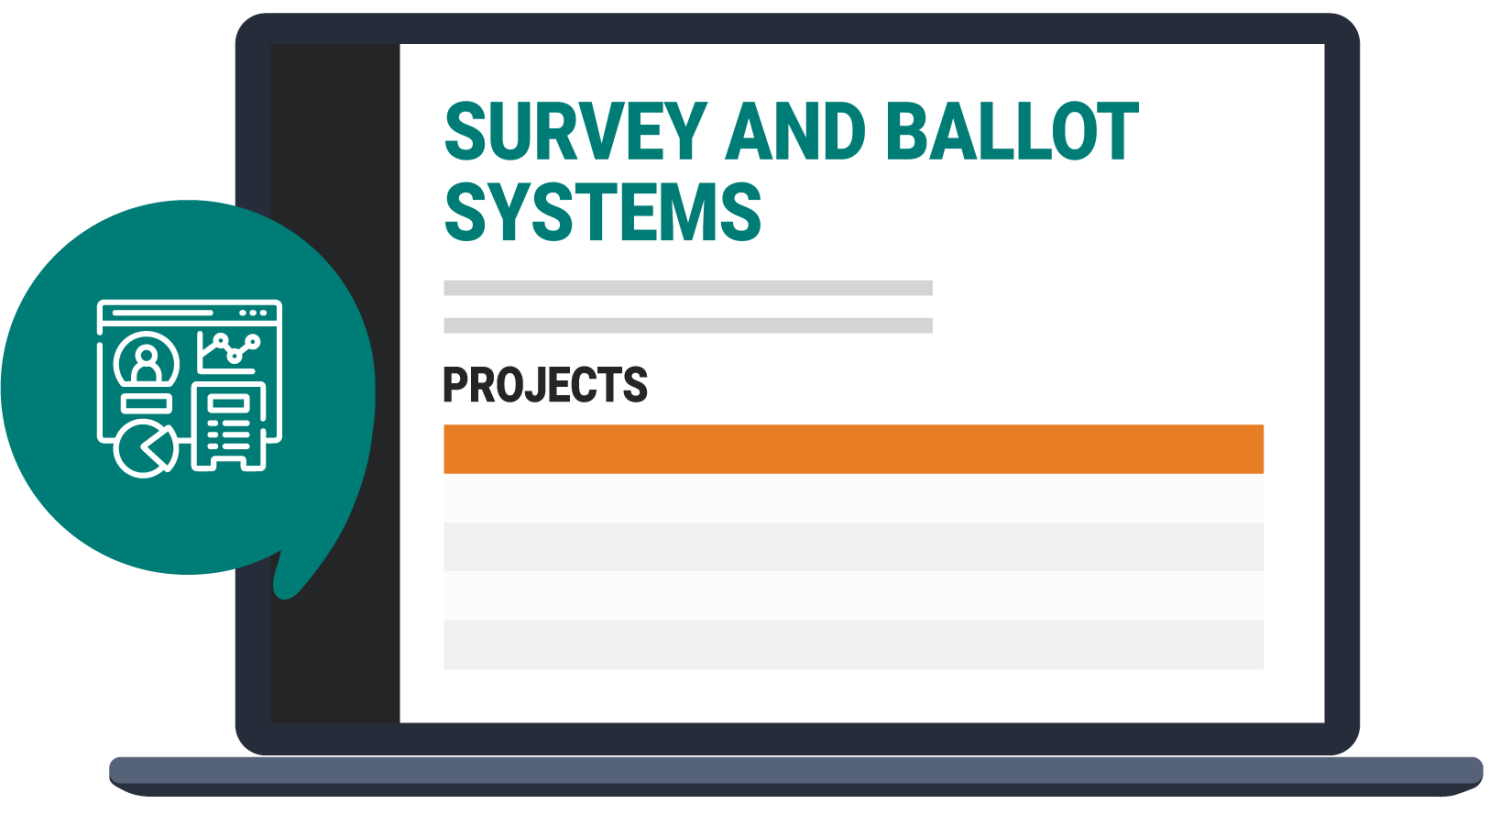 an illustration of a survey and ballot systems project